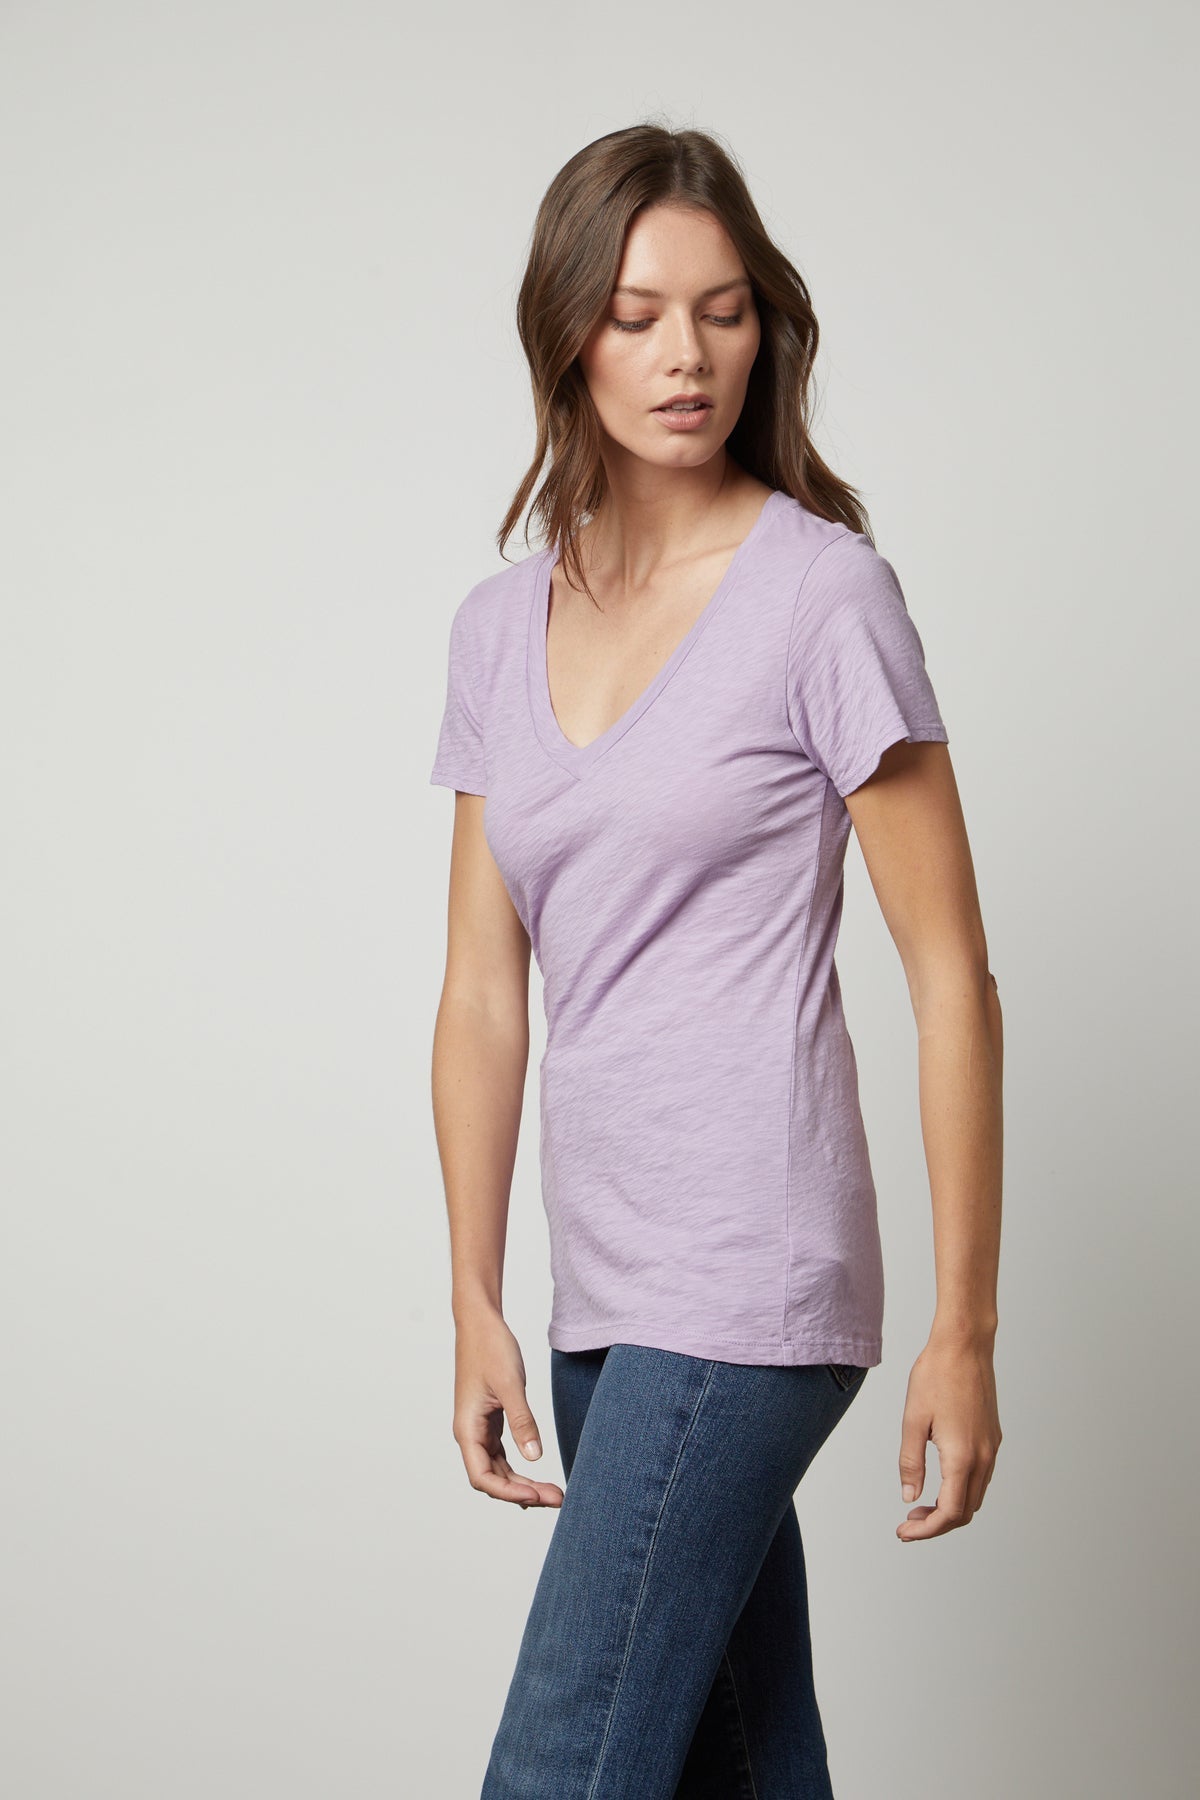 A woman with a tomboy style wearing a Velvet by Graham & Spencer LILITH COTTON SLUB V-NECK TEE.-35782982140097